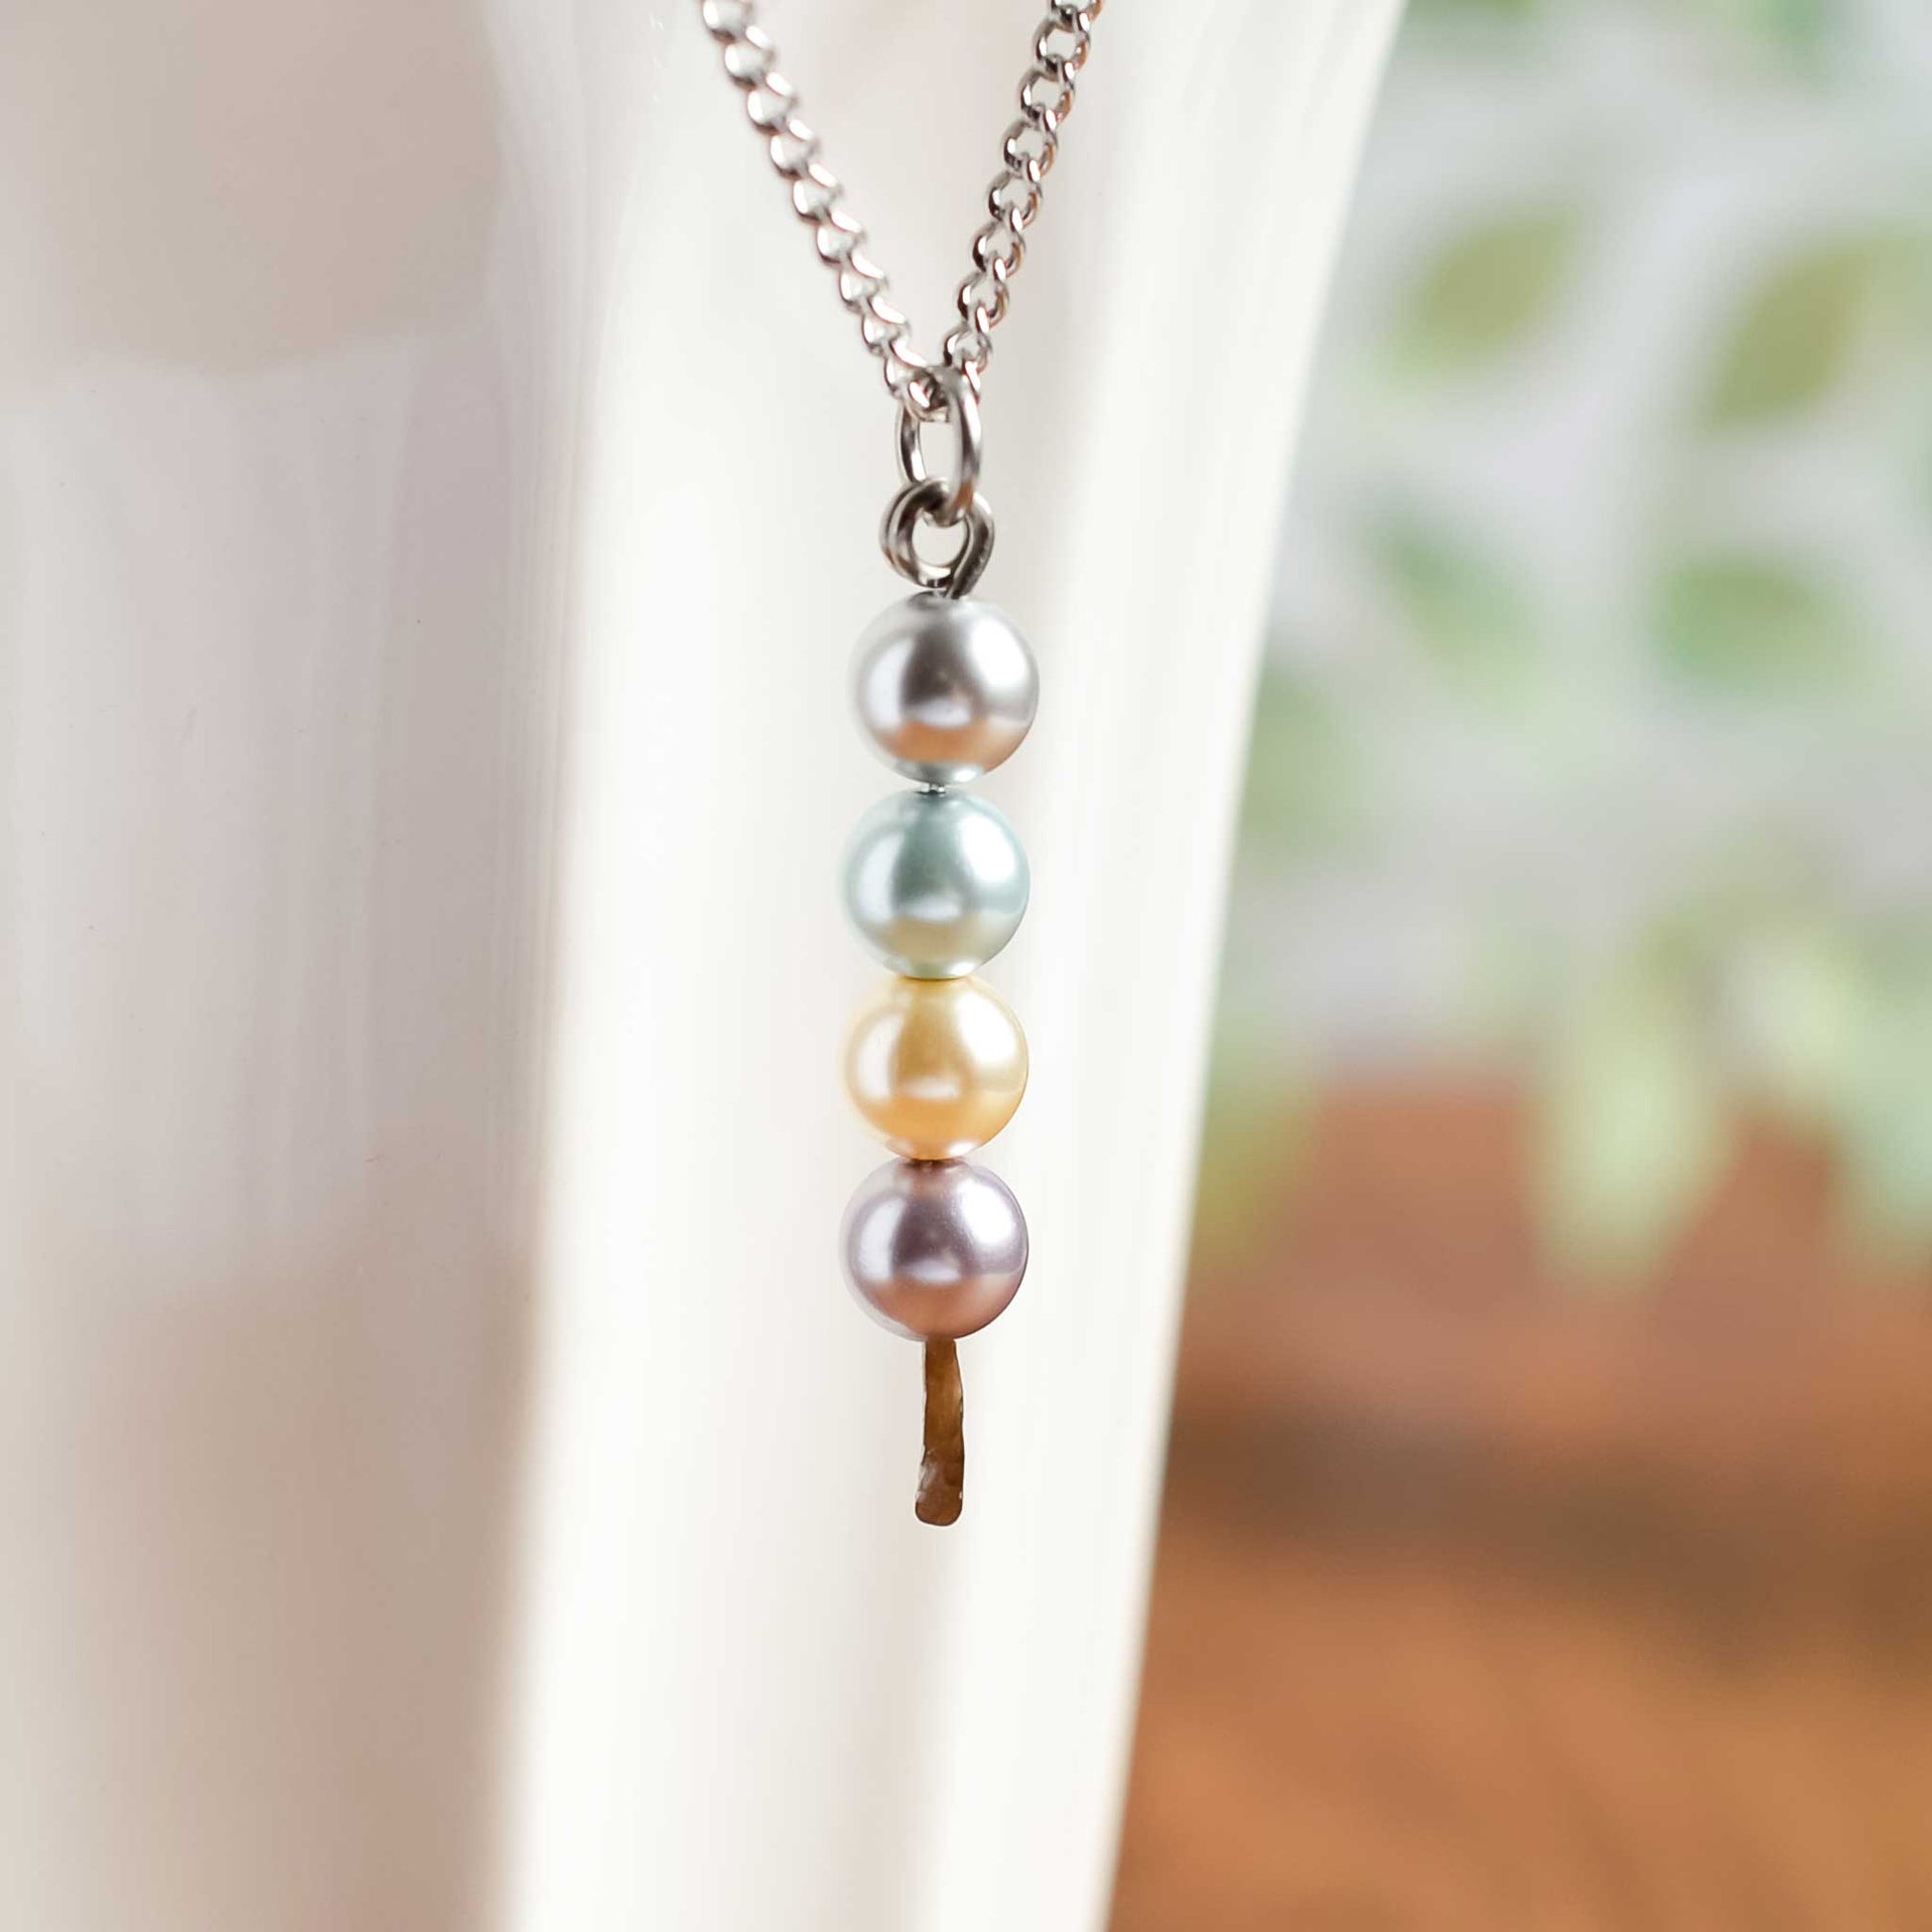 Faux pastel pearl stack pendant hanging on white cup